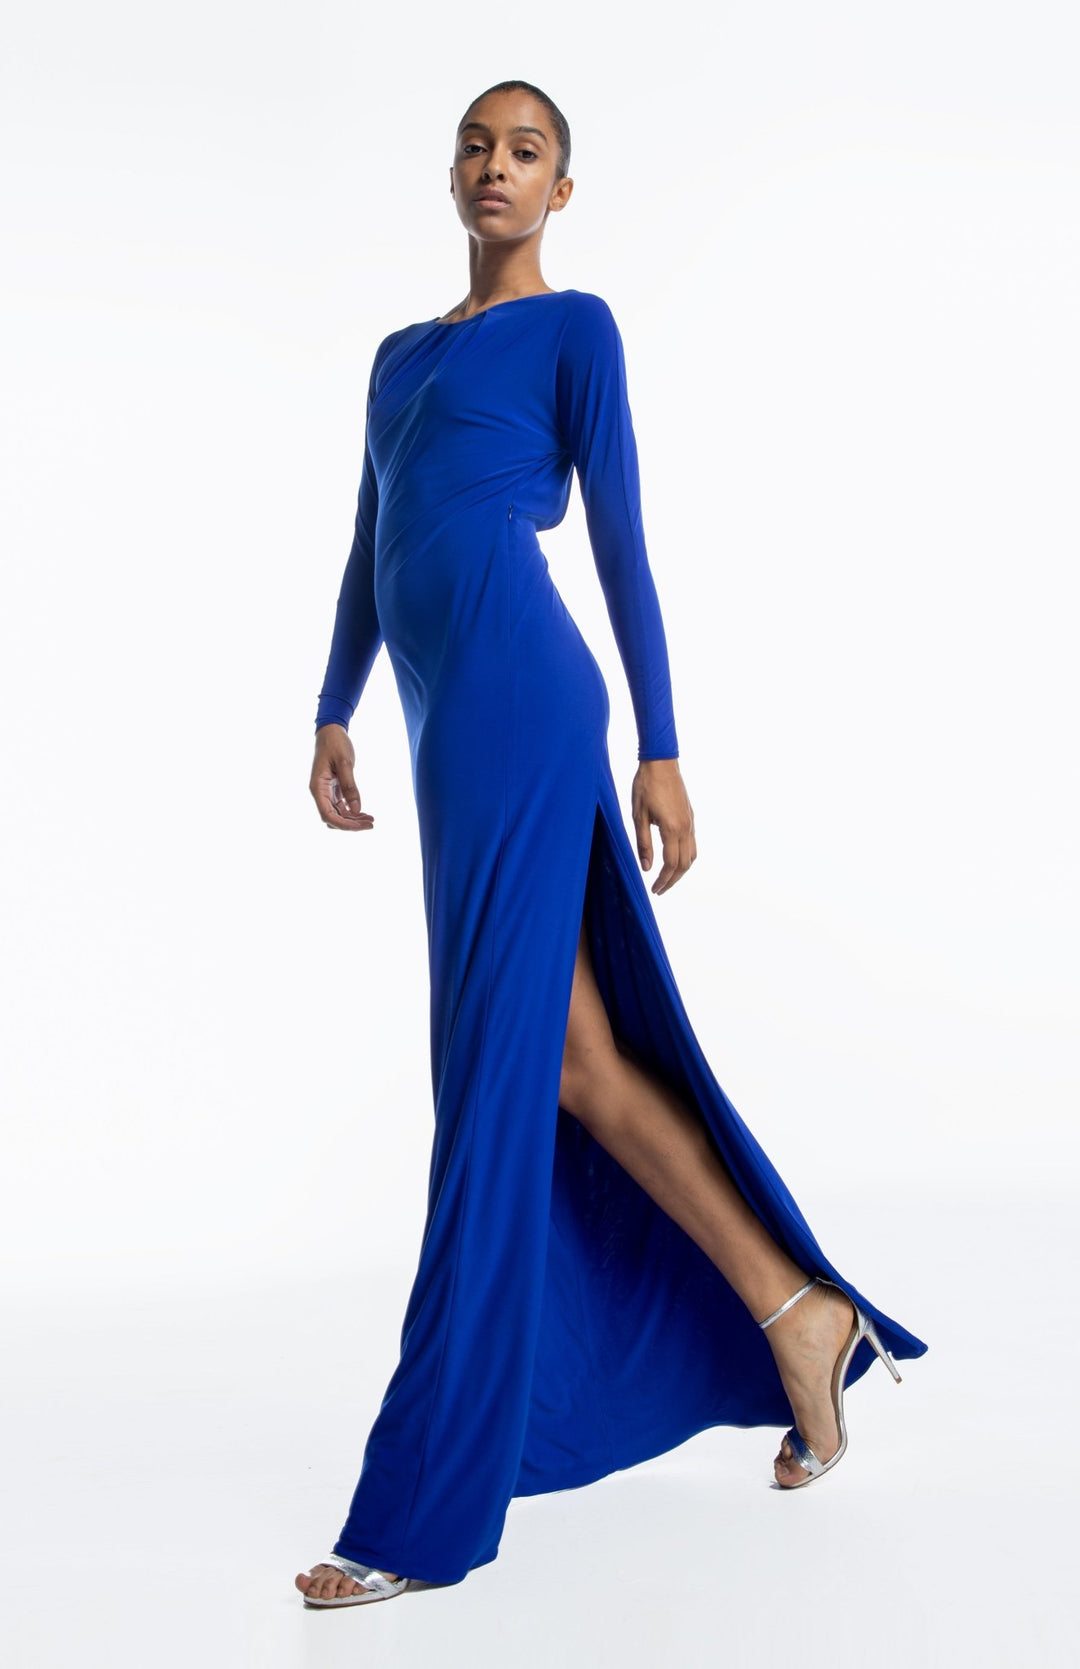 Slim, Grecian style, backless gown, with back cutout detail in royal blue jersey knit